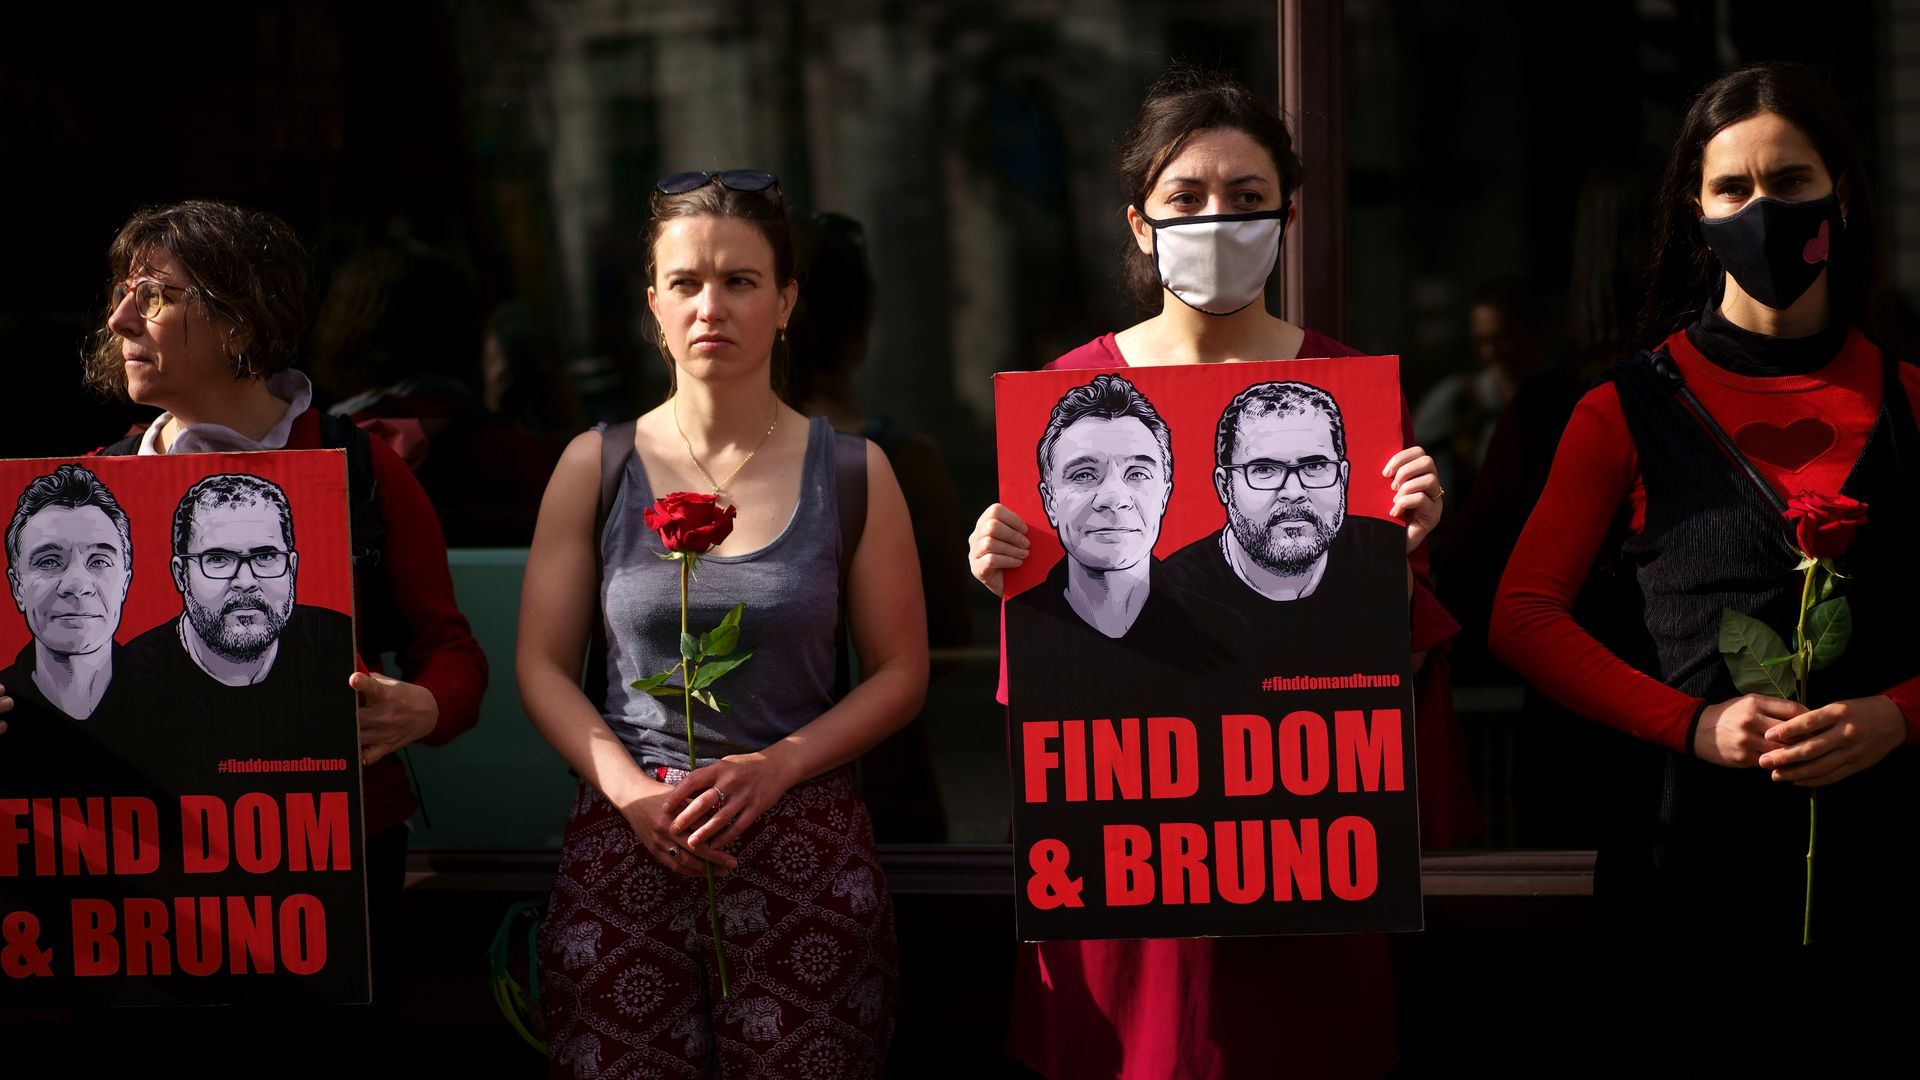 Supporters at a vigil outside the Brazilian Embassy in London for Dom Phillips and Bruno Araujo Pereira